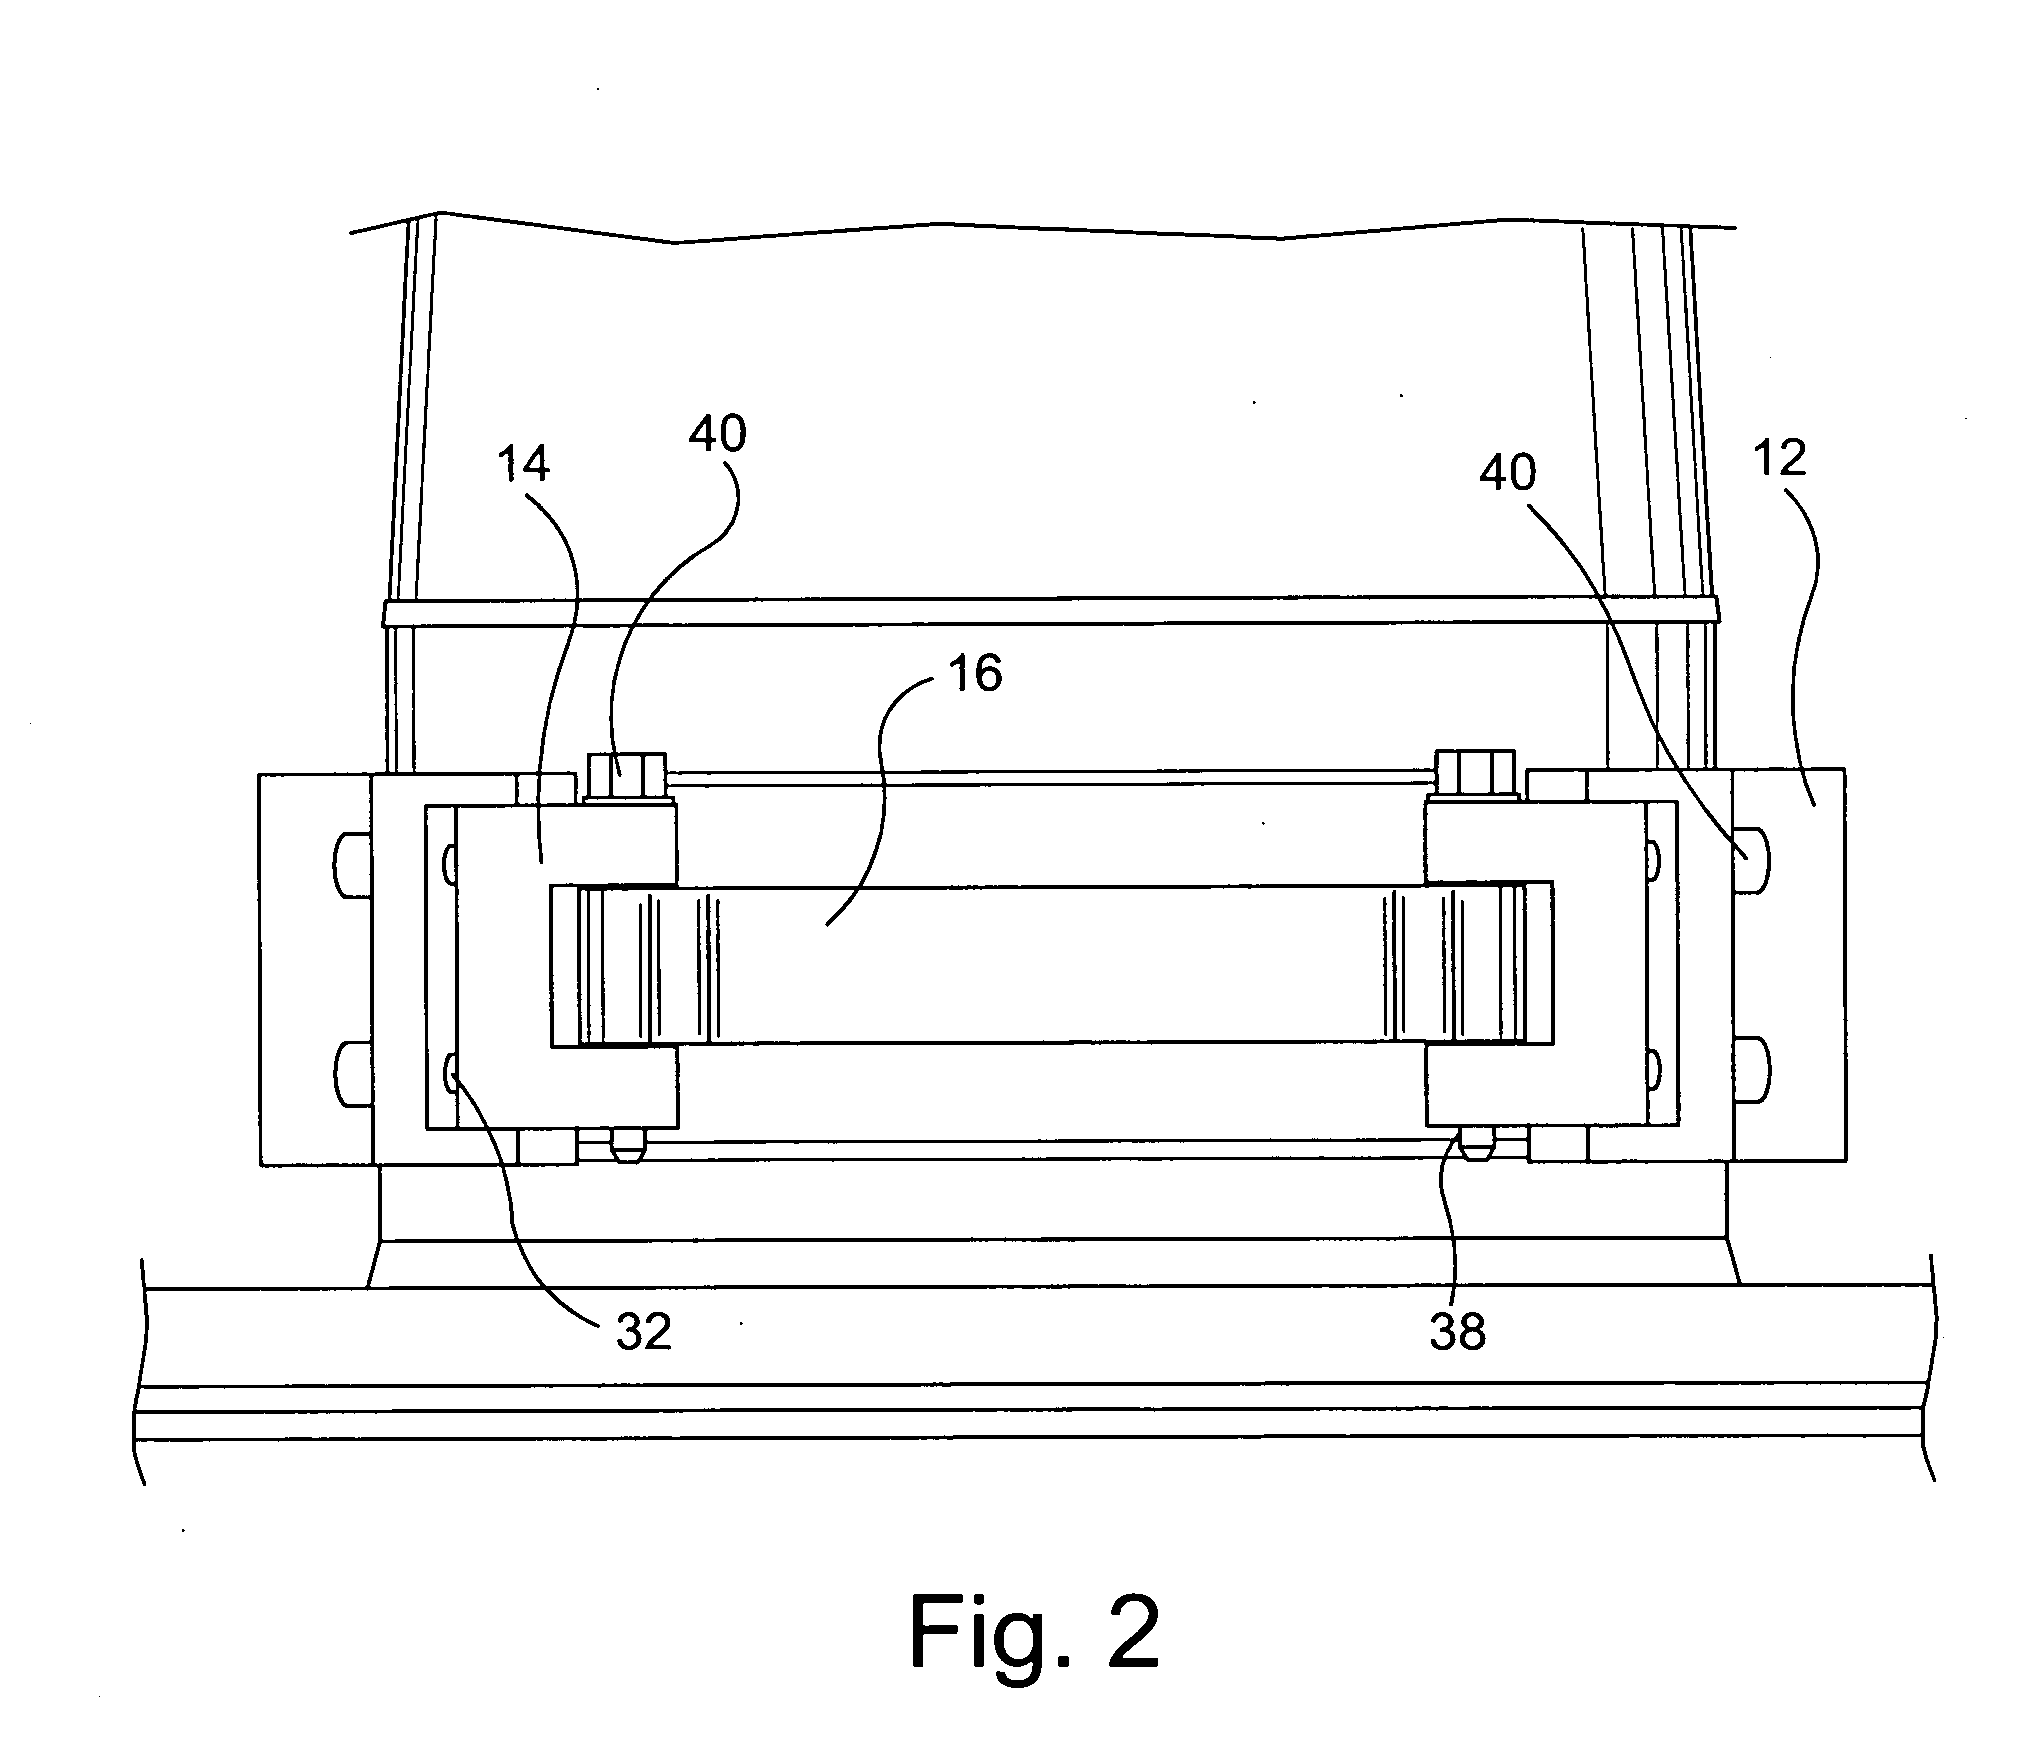 Method and apparatus for repairing a jet pump diffuser adapter to tailpipe weld